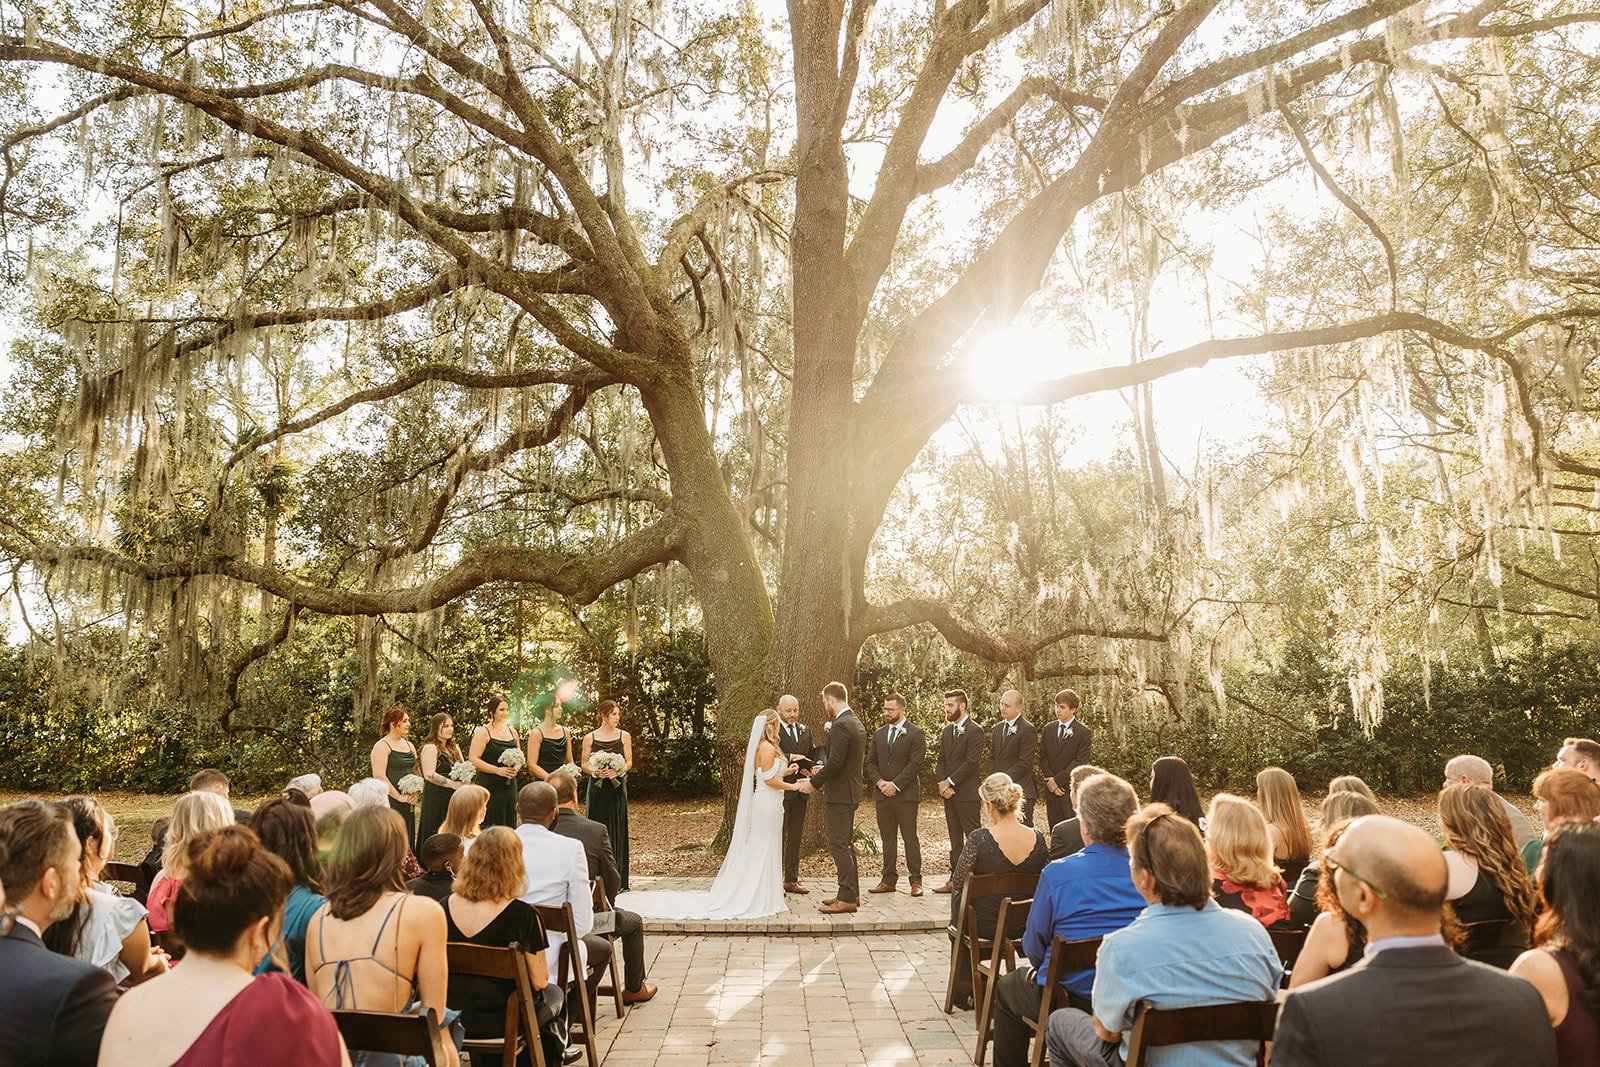 Sun shining. Birds chirping. Guest smiling. Is there any better way to begin your happily ever after?

@meagangainesphotography
@white_tie_events
@southerncharmevents
@4riverssmokehouse

#weddingday #southernwedding #bowingoaks #jacksonvillewedding #